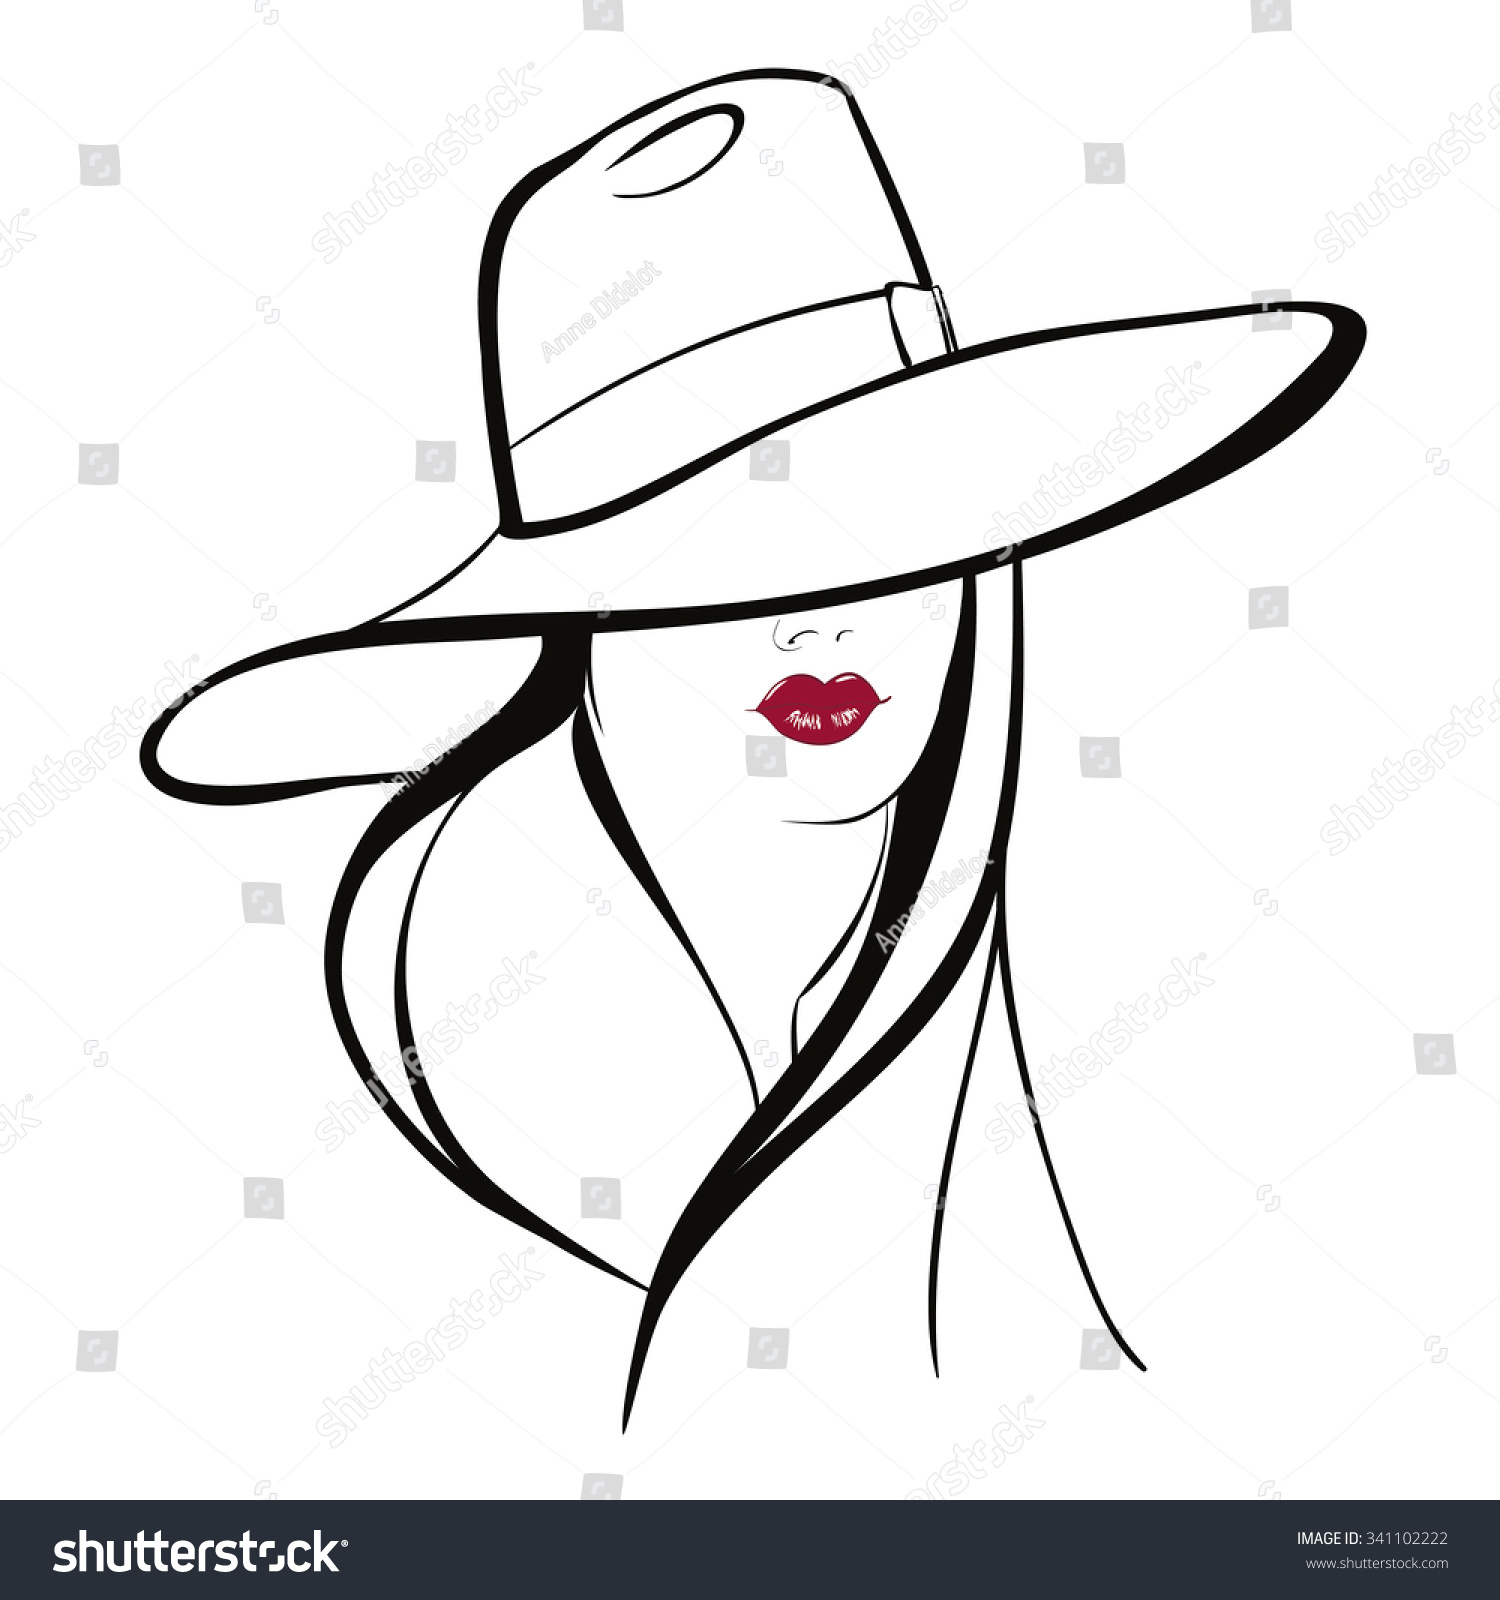 Graphic Woman Head Wearing Large Hat Stock Vector 341102222 - Shutterstock